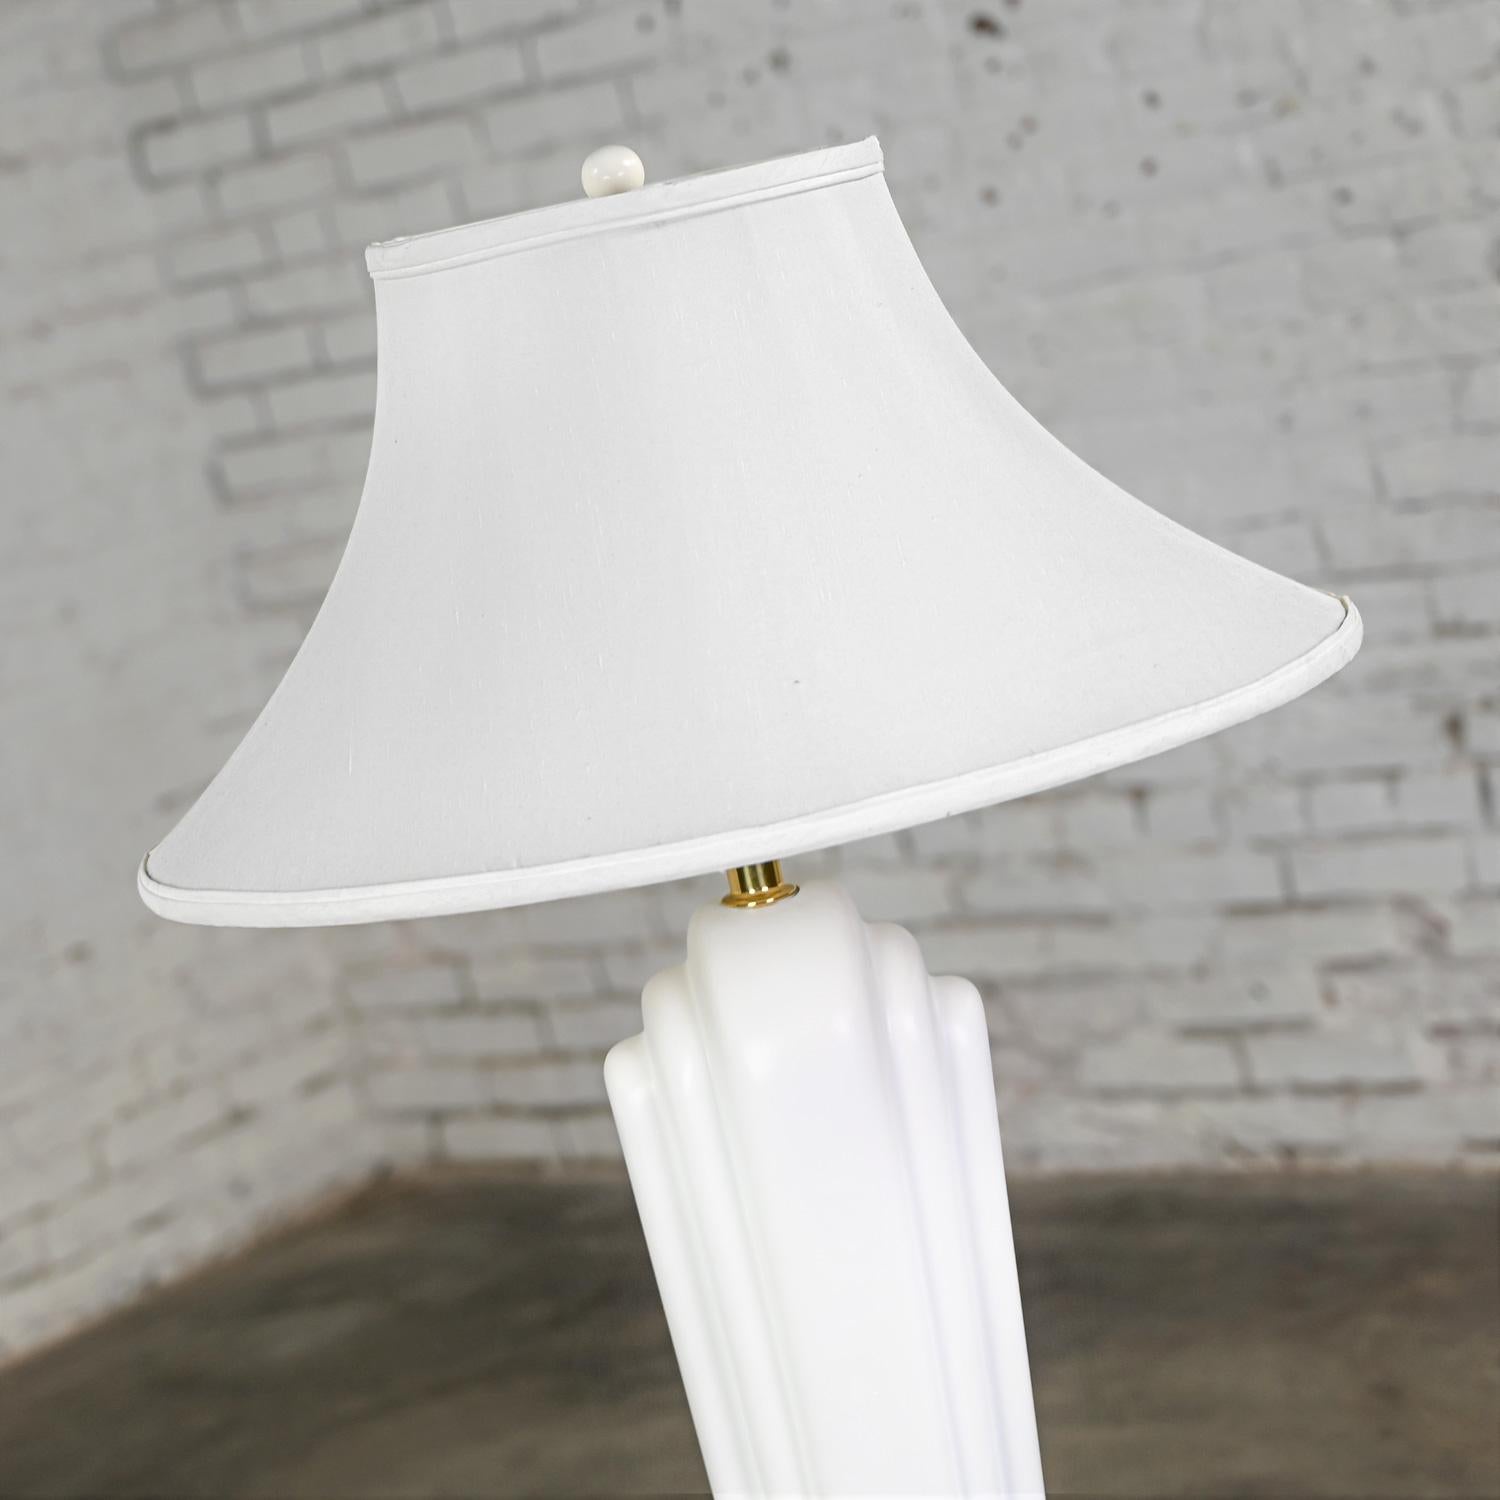 Art Deco Revival to Postmodern Paolo Gucci Floor Lamp White Sculpted Resin  For Sale 3